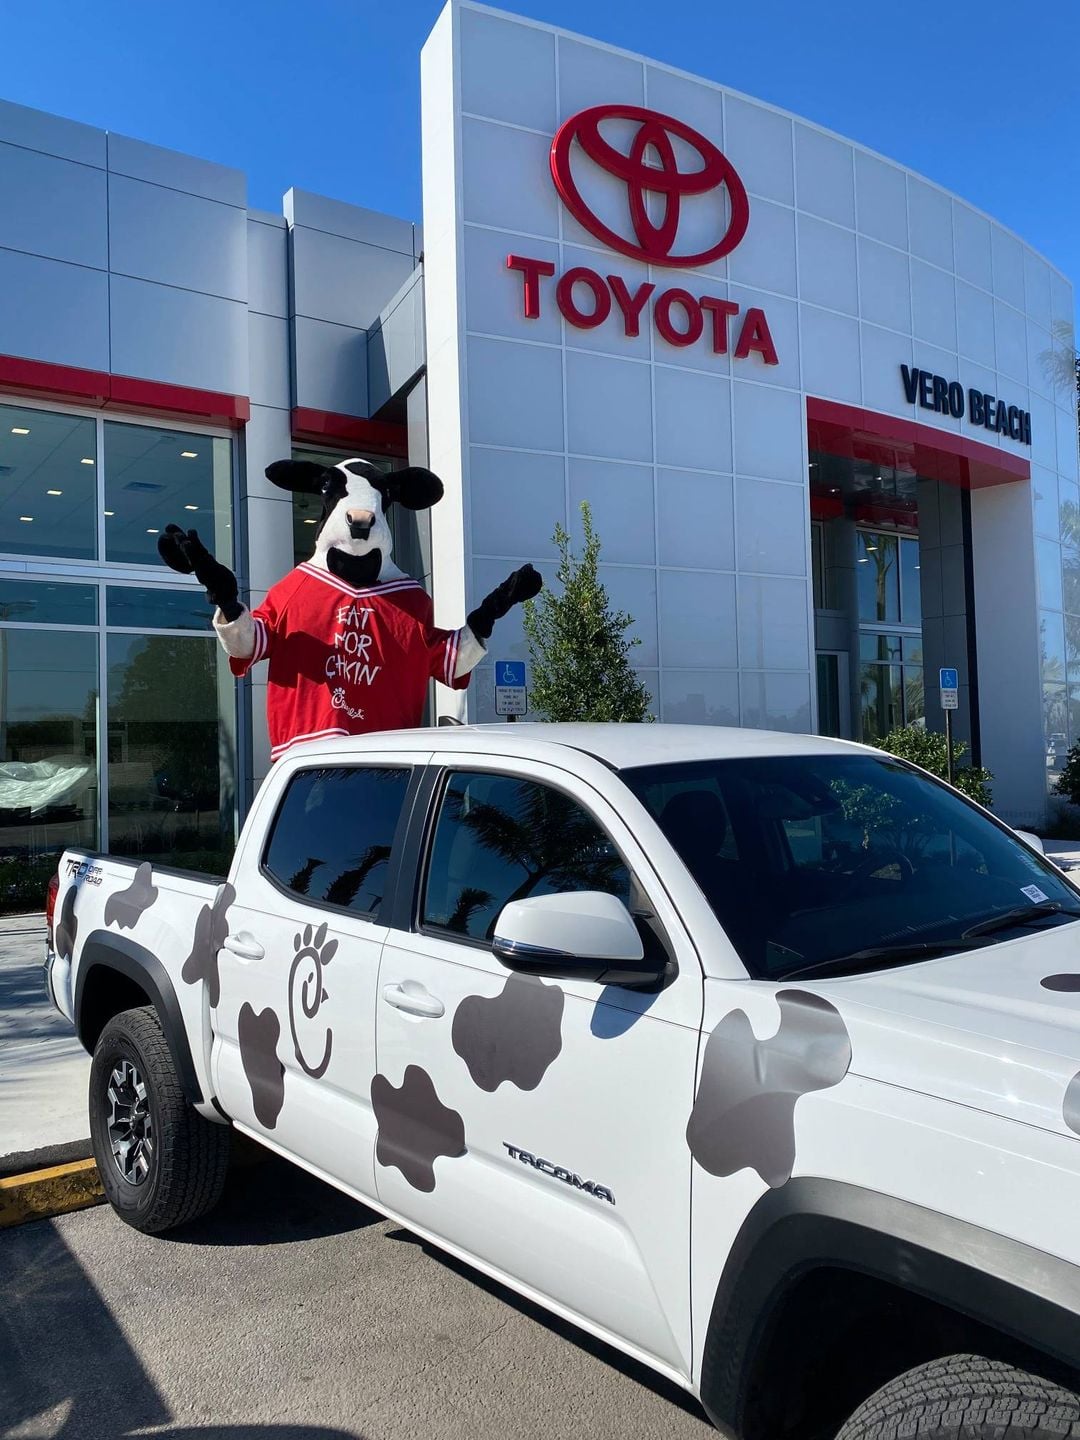 Chik-fil-a cow stands in the bed of a Toytoa Tundra pick up truck at Vero Beach Toyota to announce the opening of the Chik-fil-a cafe